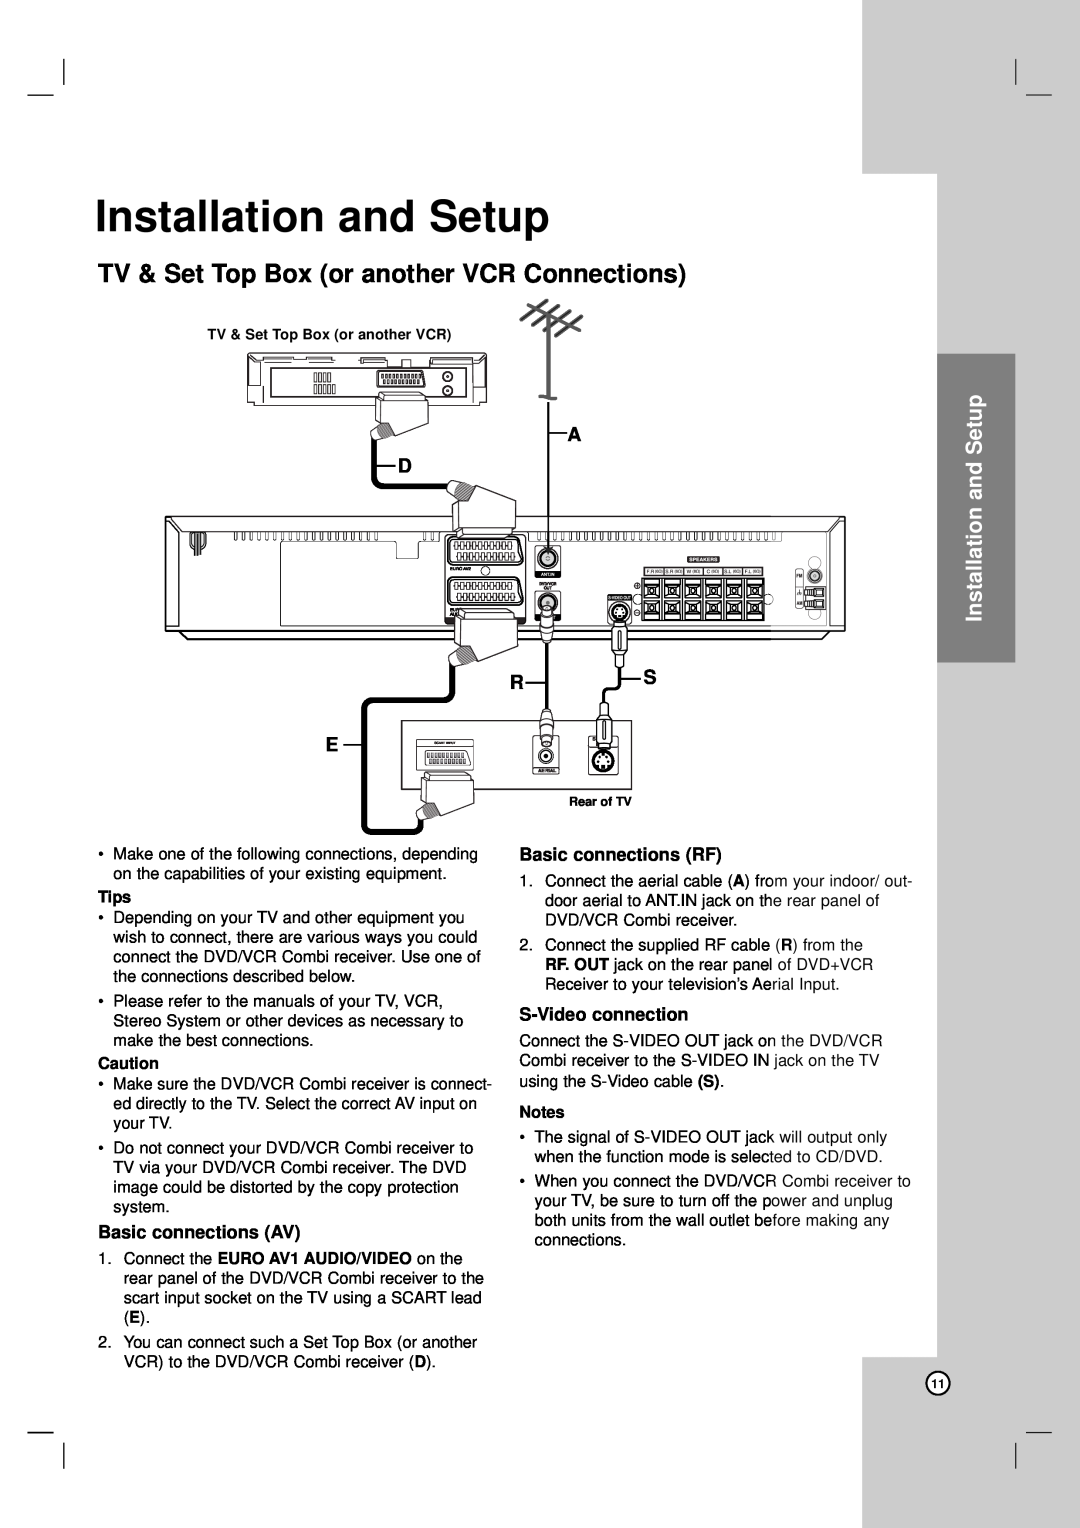 LG Electronics LH-CX245 Installation and Setup, TV & Set Top Box or another VCR Connections, Basic connections AV, Tips 